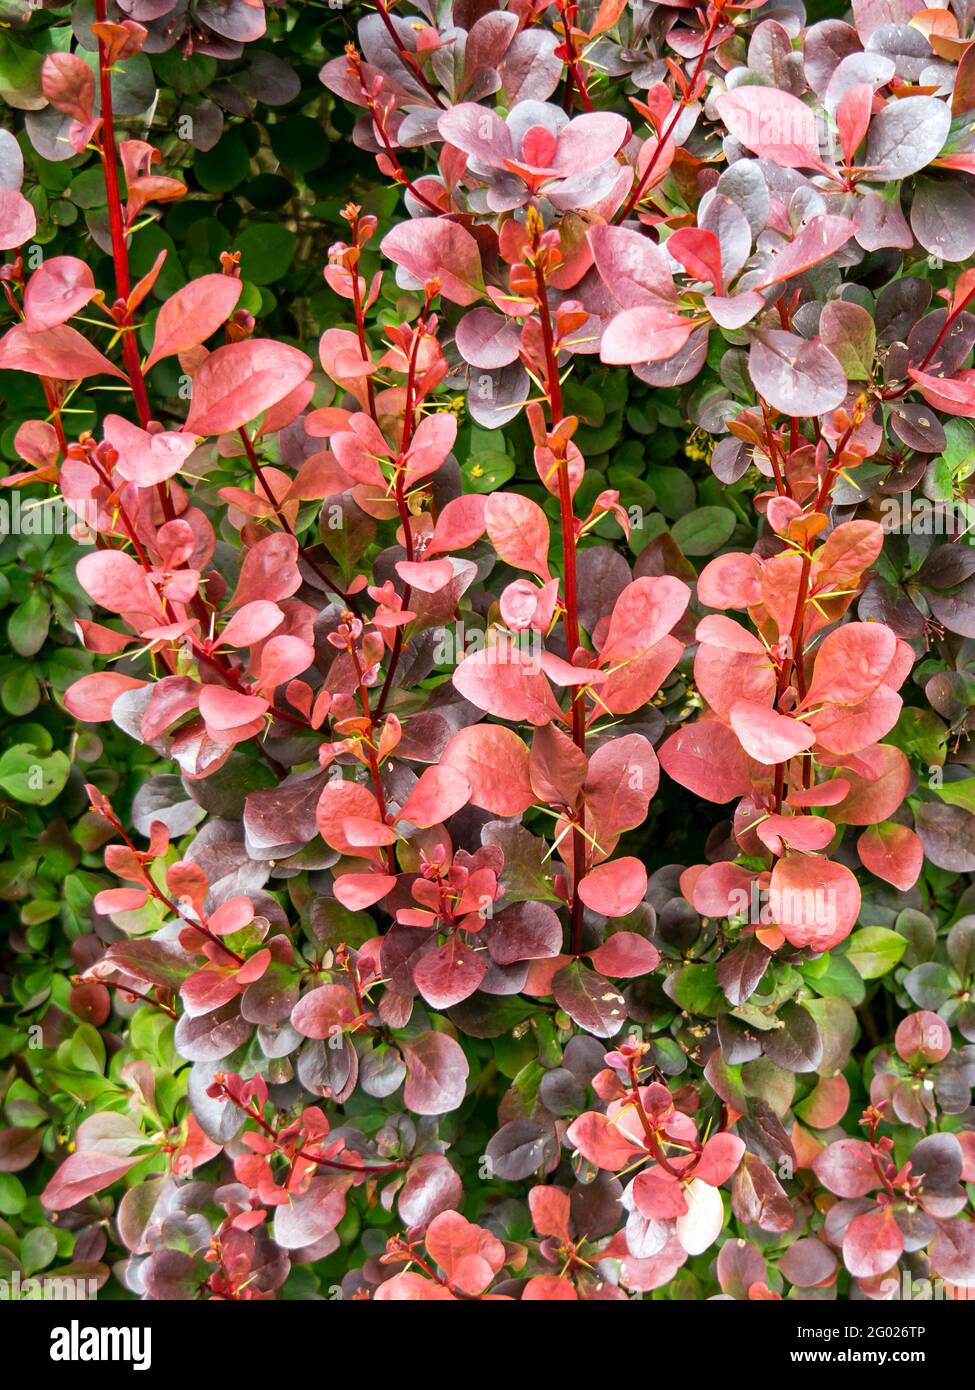 Beautiful bronze leaves on a Japanese barberry shrub Stock Photo